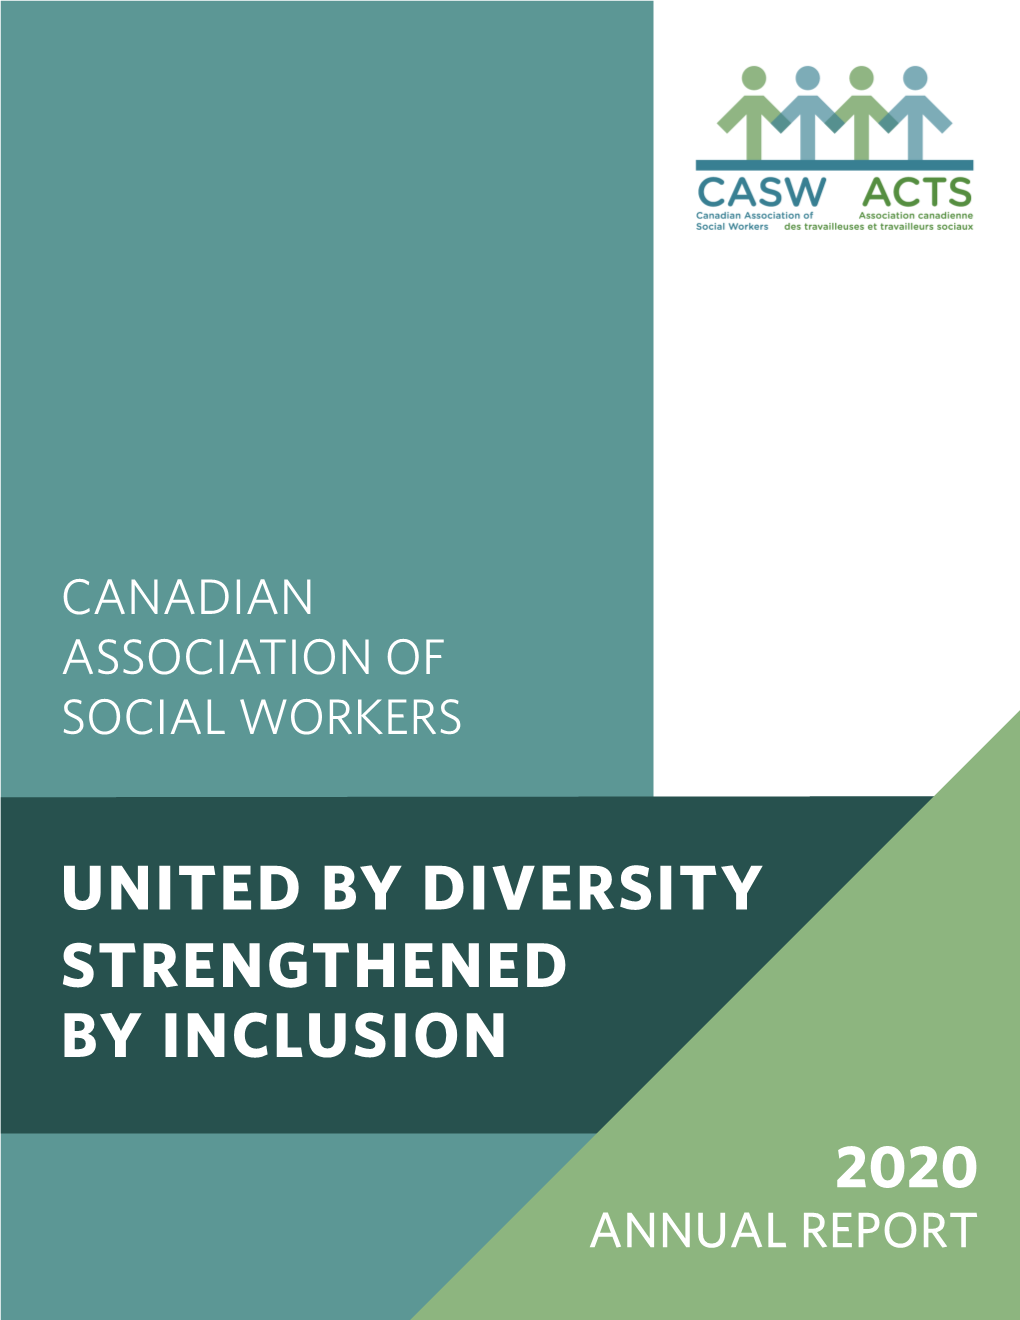 United by Diversity Strengthened by Inclusion